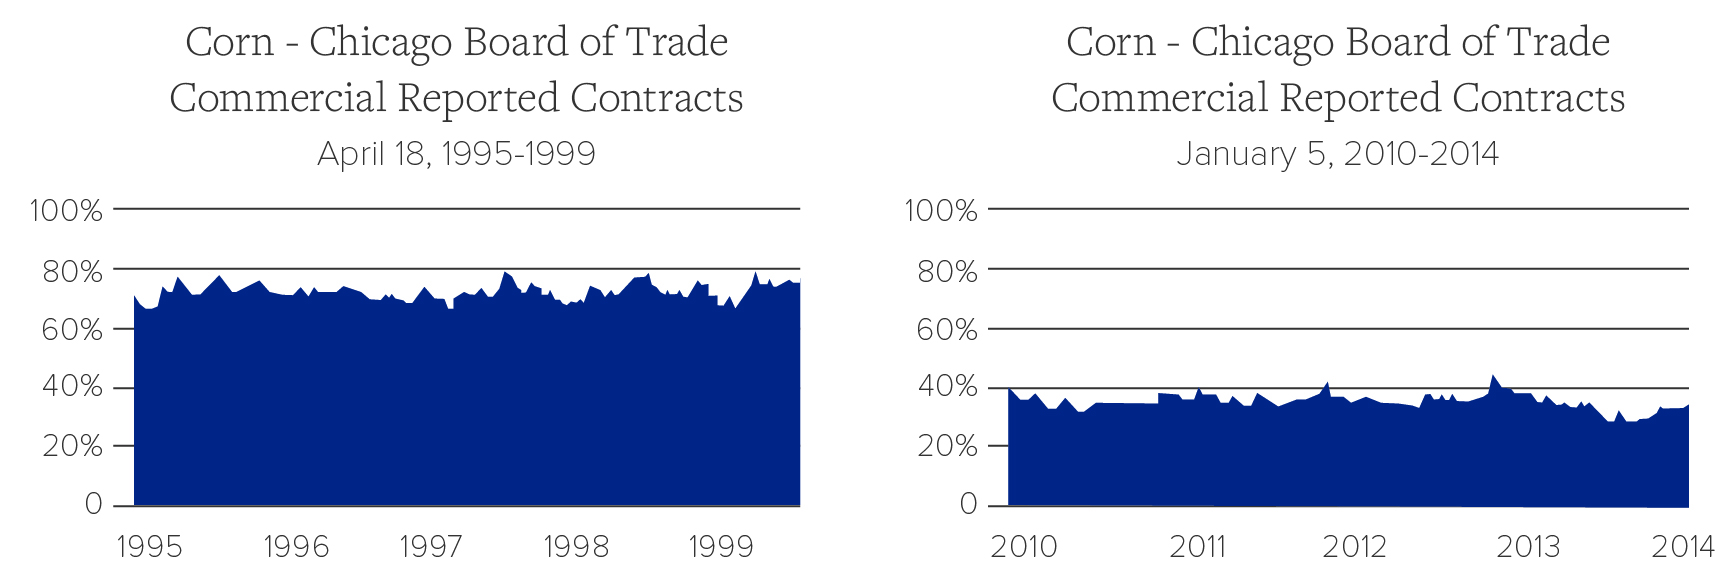 Commercial Contracts for Corn